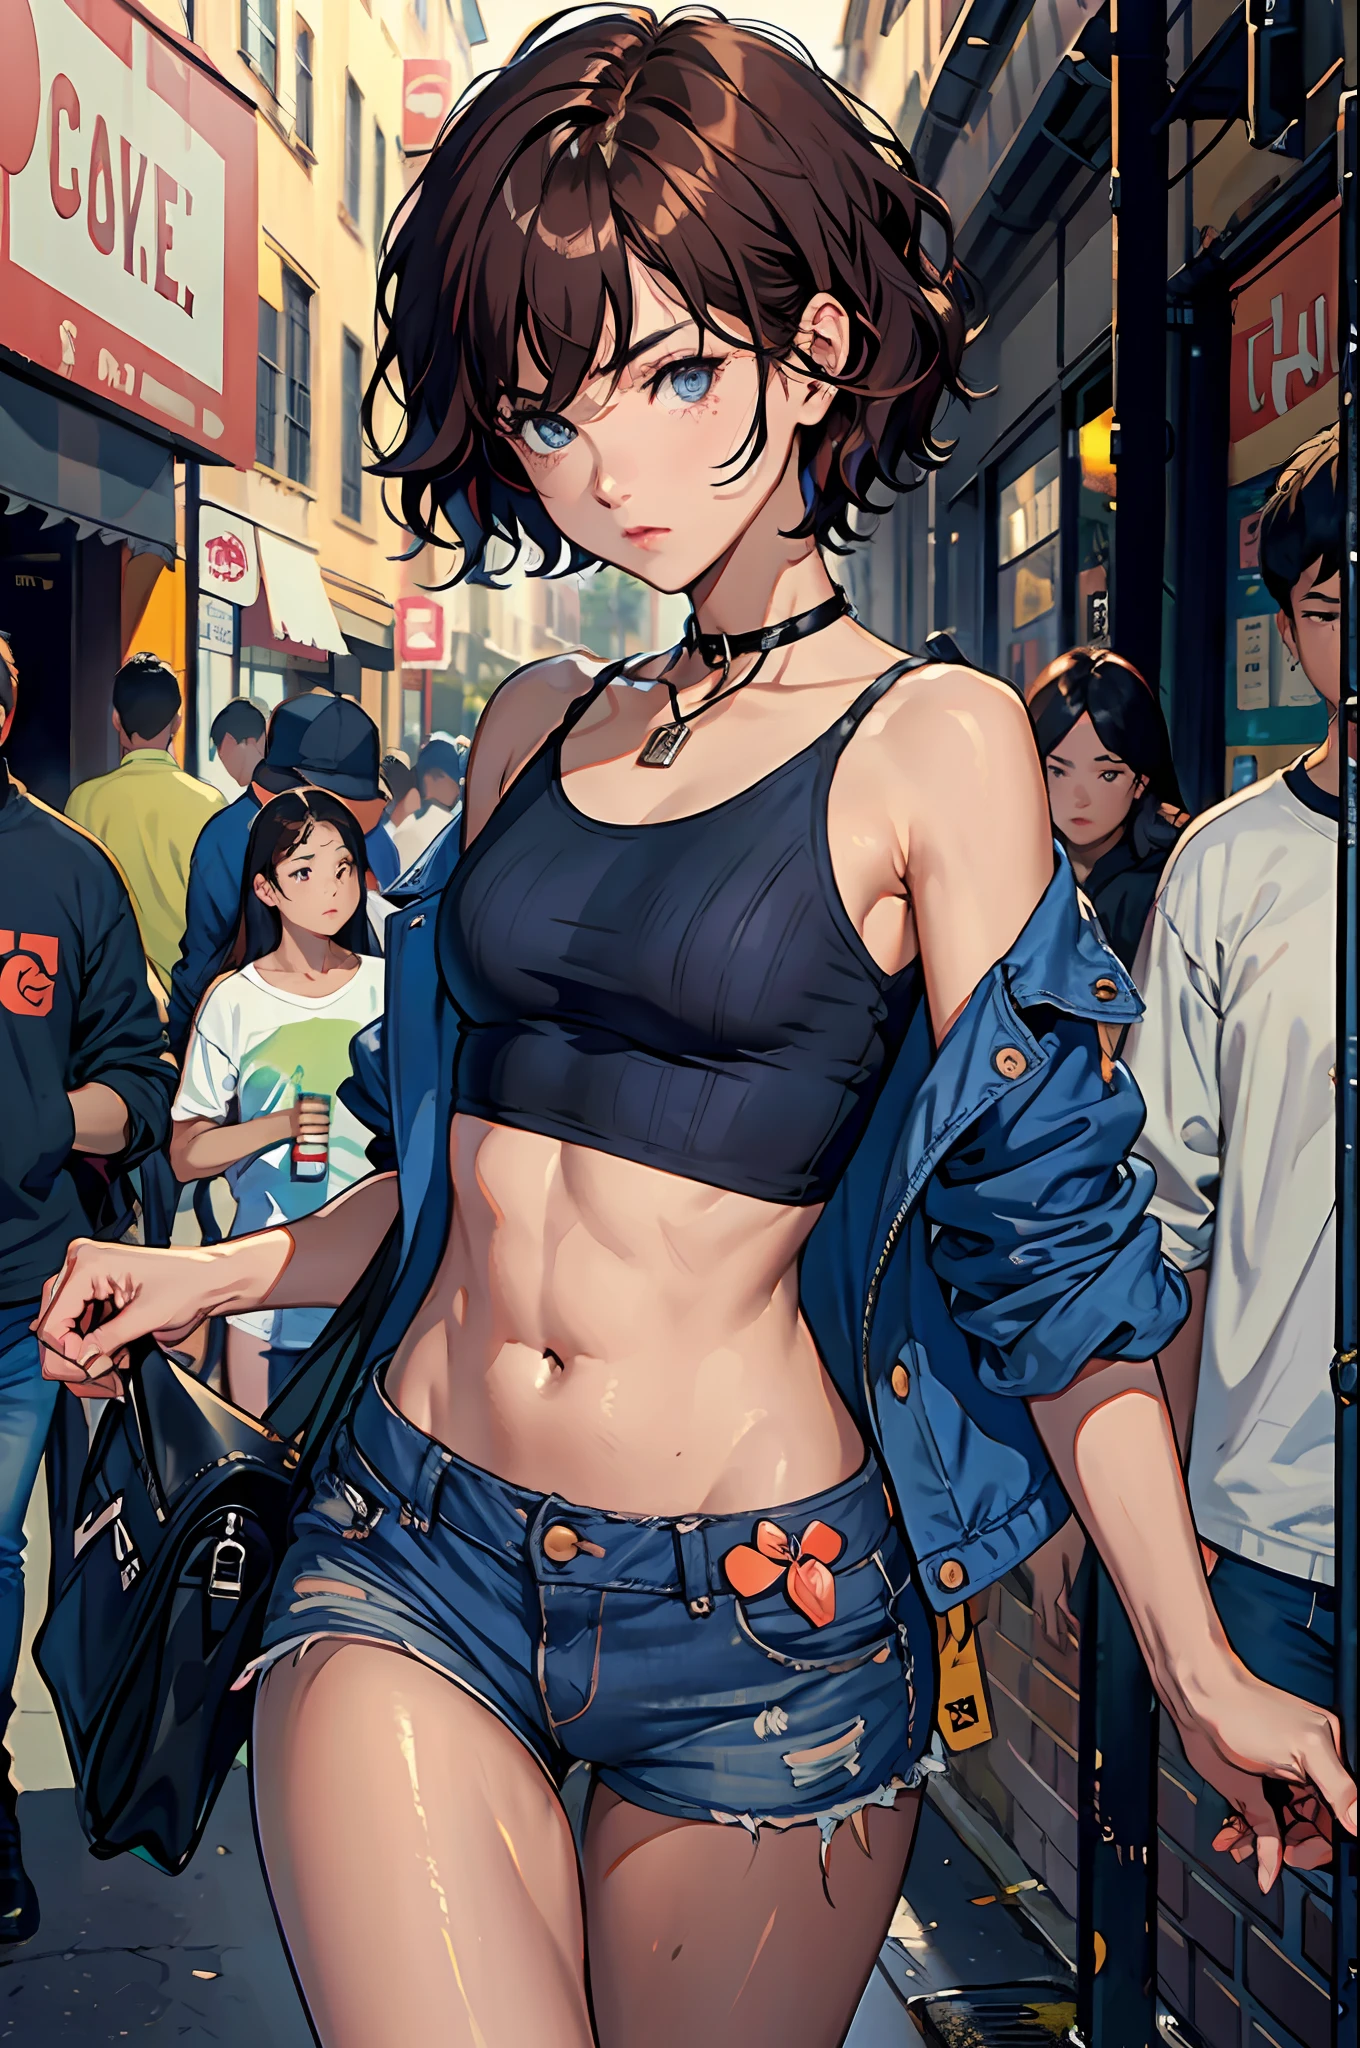 ((medium breast, tomboy girls, small head)),  (chiseled abs : 1.1), (perfect body : 1.1), (short wavy hair : 1.2) , auburn hair, collar, chain, full body shot, crowded street, wearing black tanktop, jeans jacket, ((shorts)), (extremely detailed CG 8k wallpaper), (an extremely delicate and beautiful), (masterpiece), (best quality:1.0), (ultra highres:1.0)